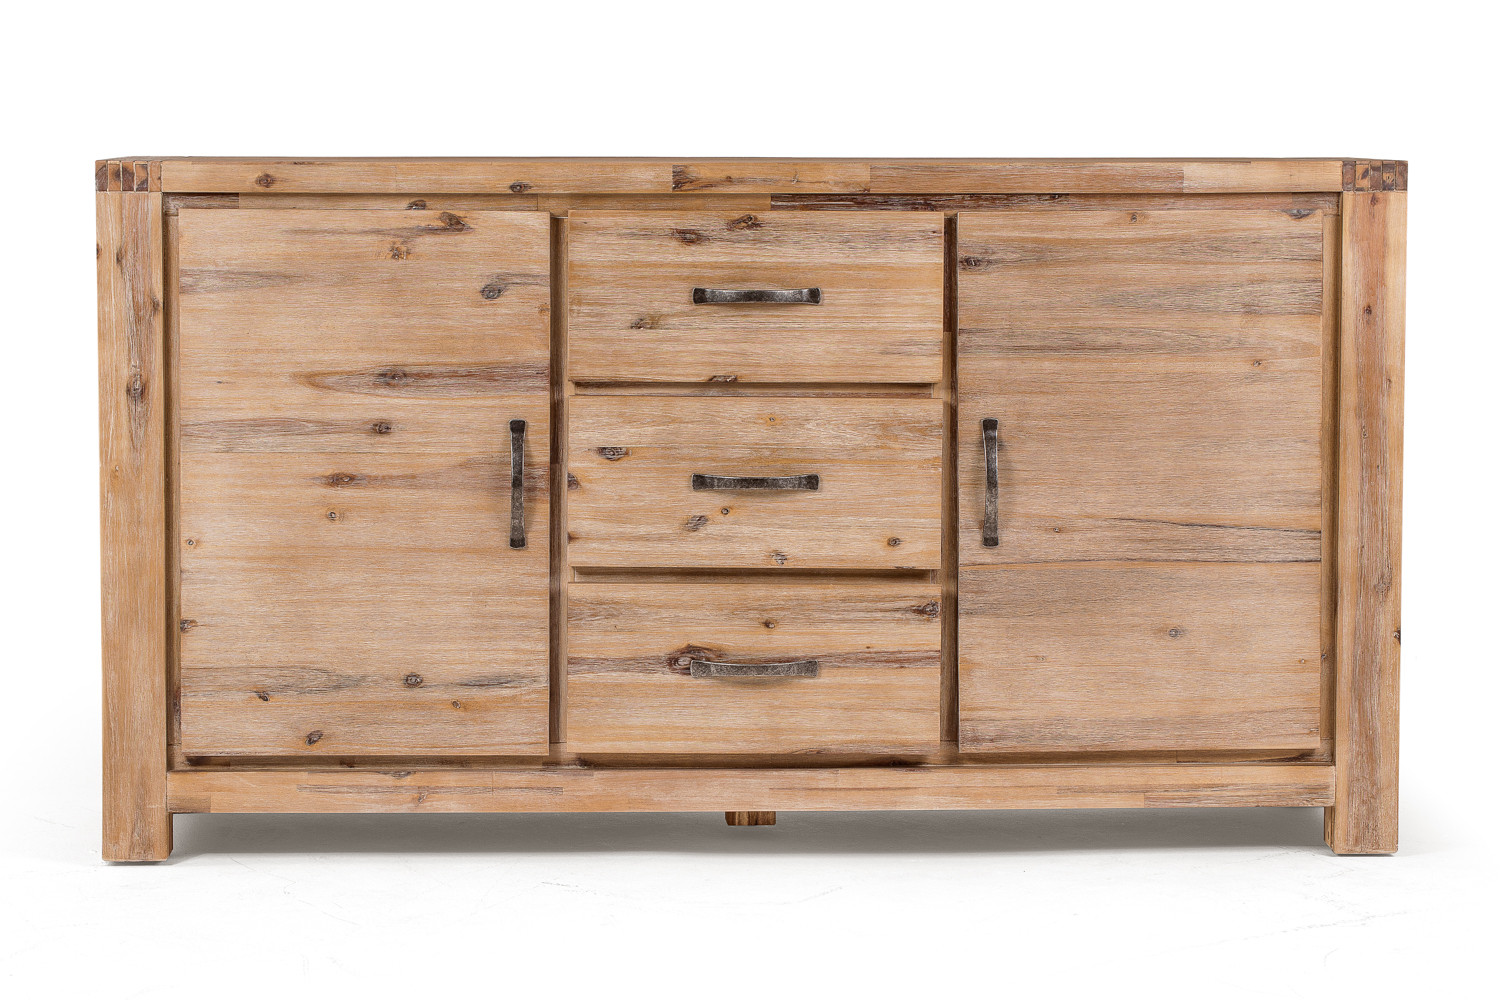 Vancouver Acacia Wood Sideboard Sideboards and Consoles - 4